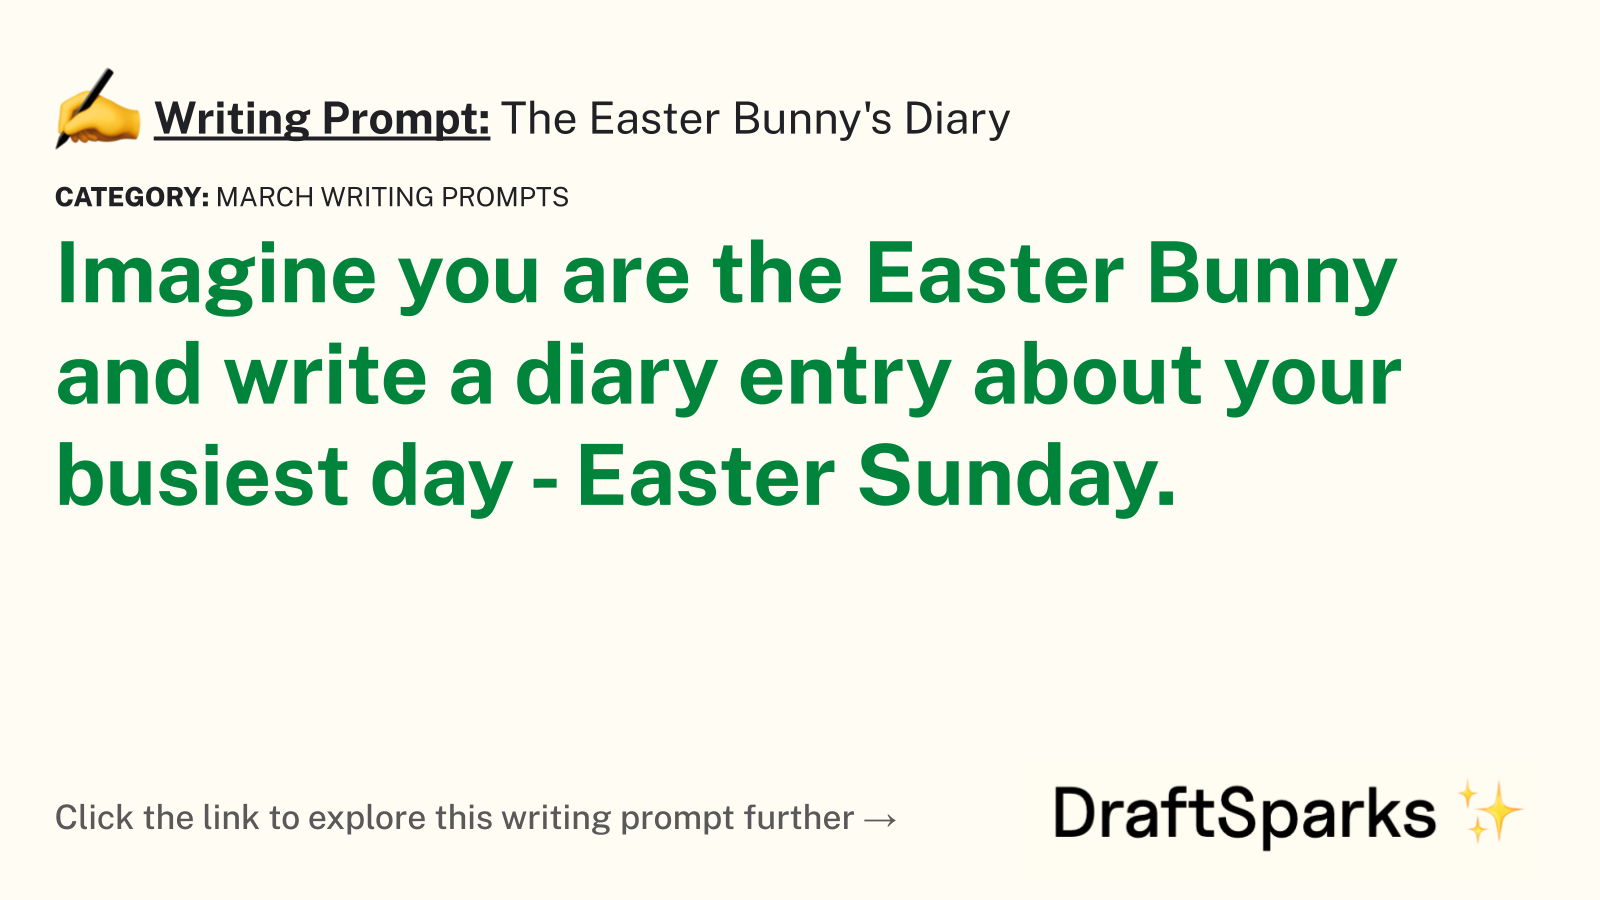 The Easter Bunny’s Diary